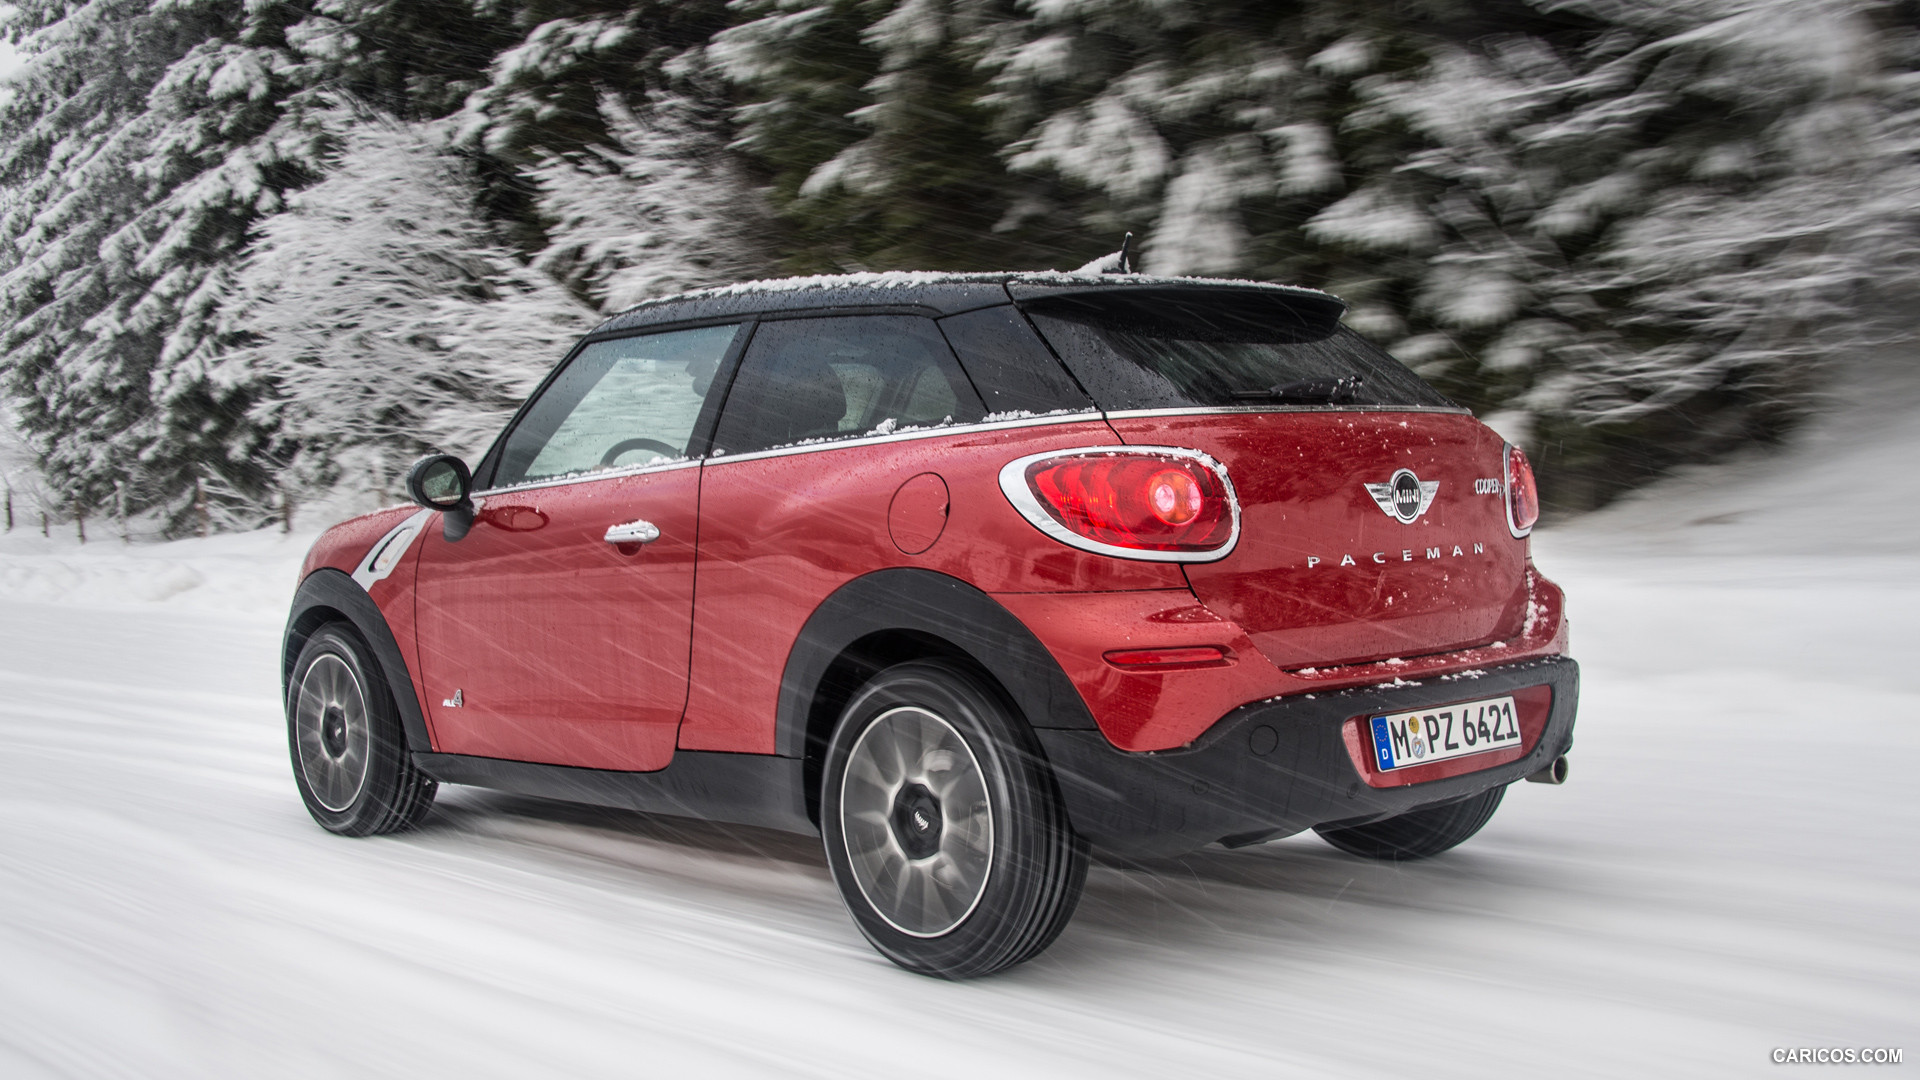 2014 MINI Cooper D Paceman ALL4 in Snow - Rear, #5 of 25